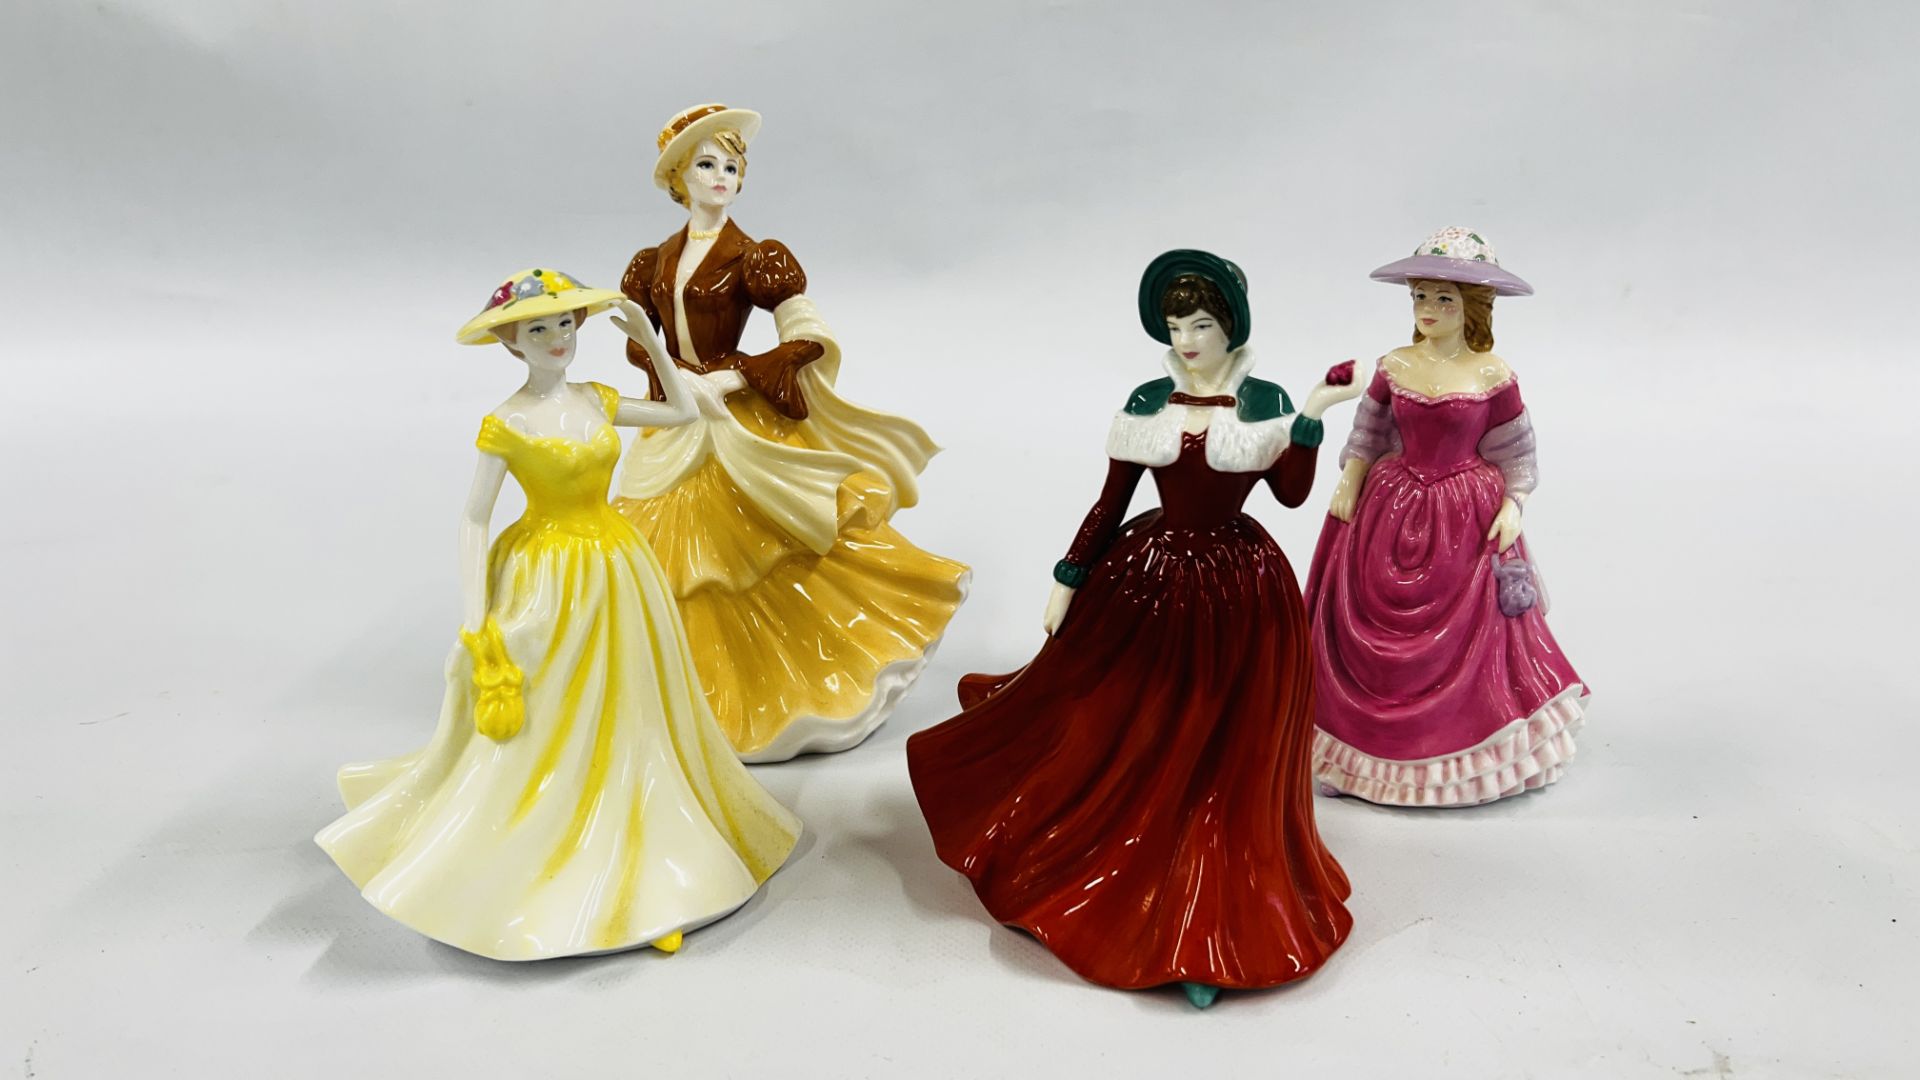 3 ROYAL DOULTON CABINET COLLECTORS FIGURES TO INCLUDE "SUMMER BREEZE" HN 4587,